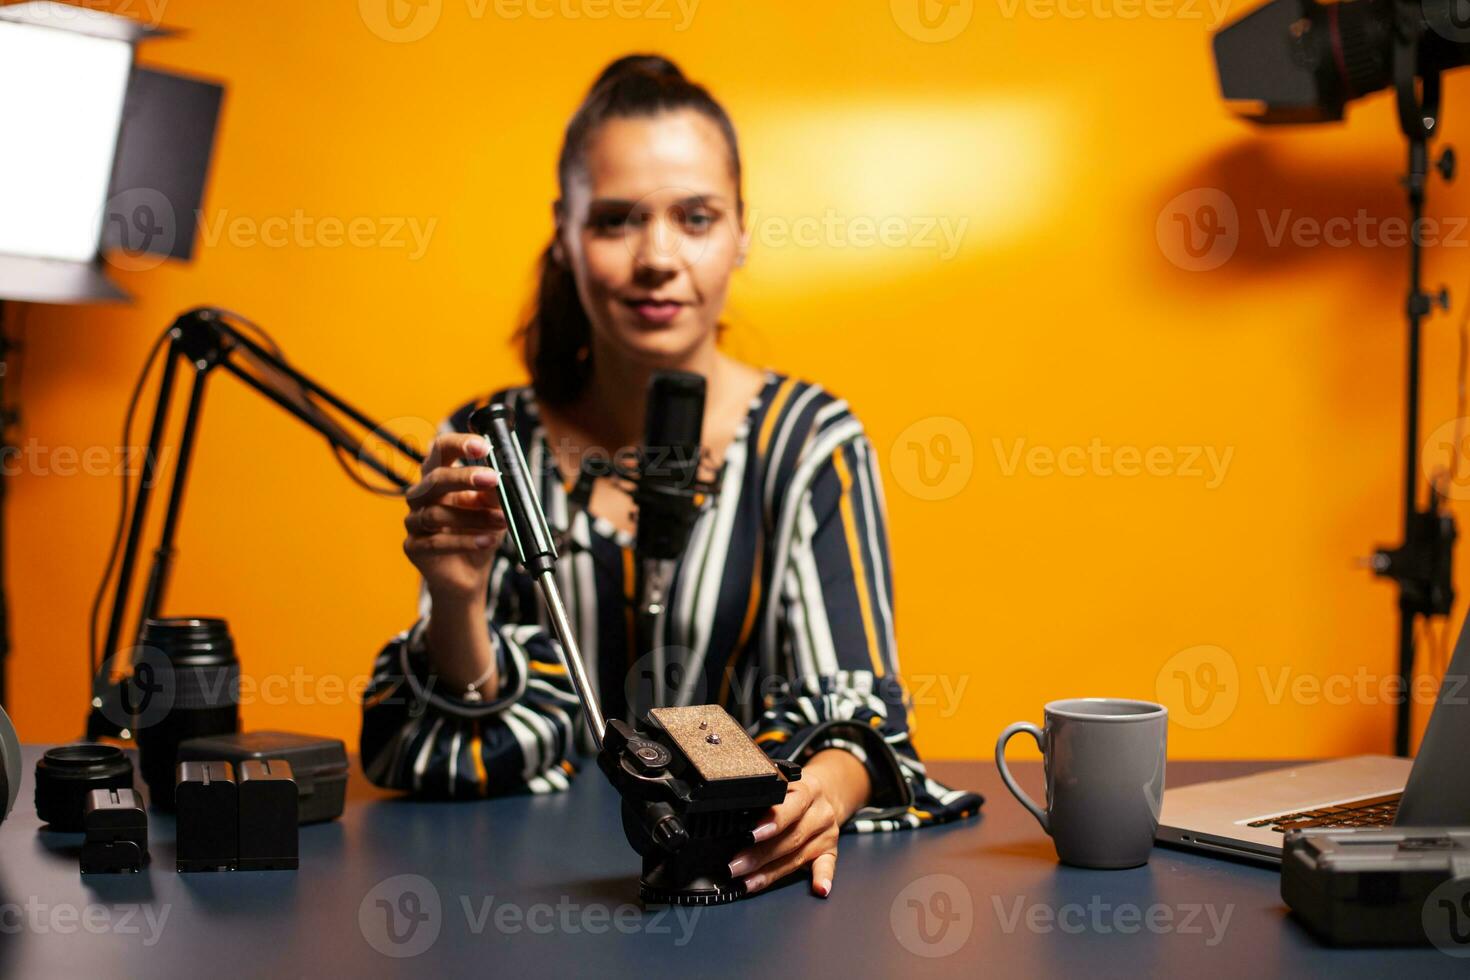 Filmmaker holding fluid head and talking baout it during podcast in home studio. Social media star making online internet content about video equipment for web subscribers and distribution, film photo